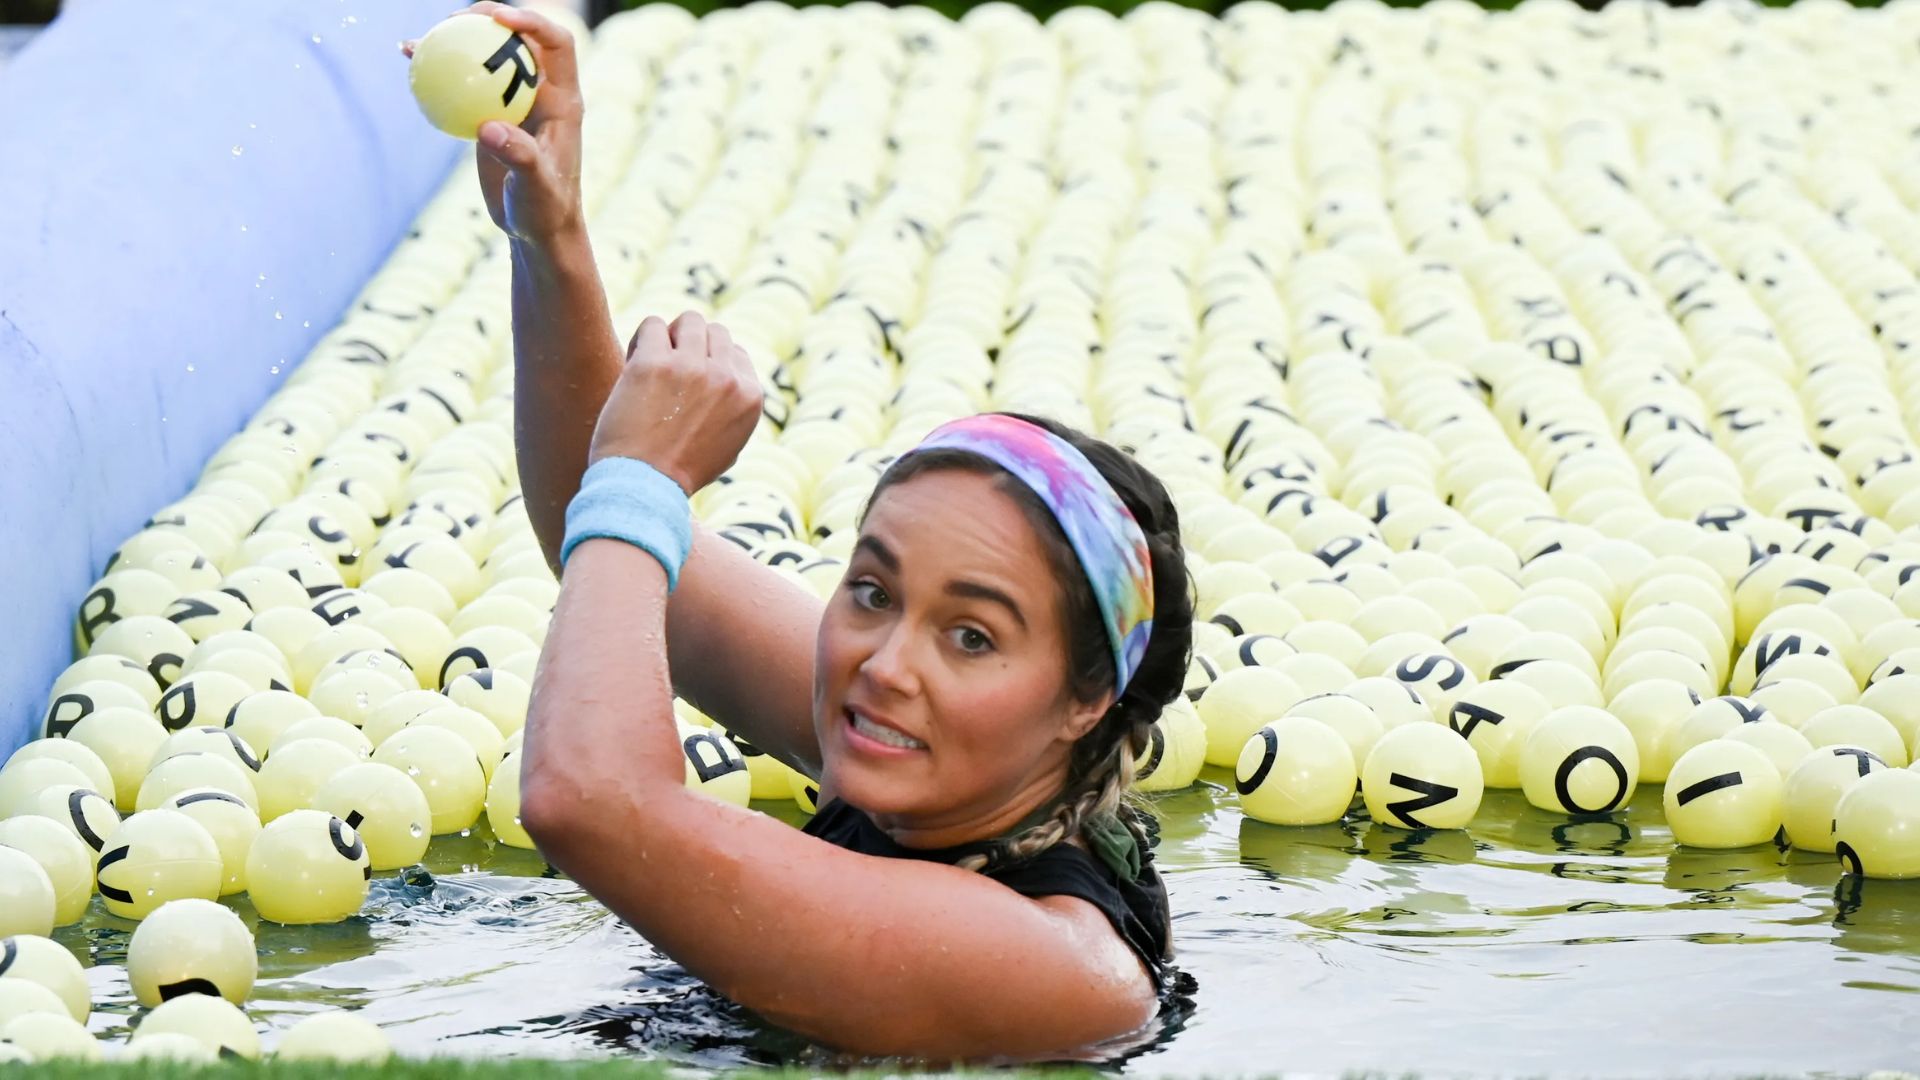  Brittany Favre in a pool with Balls